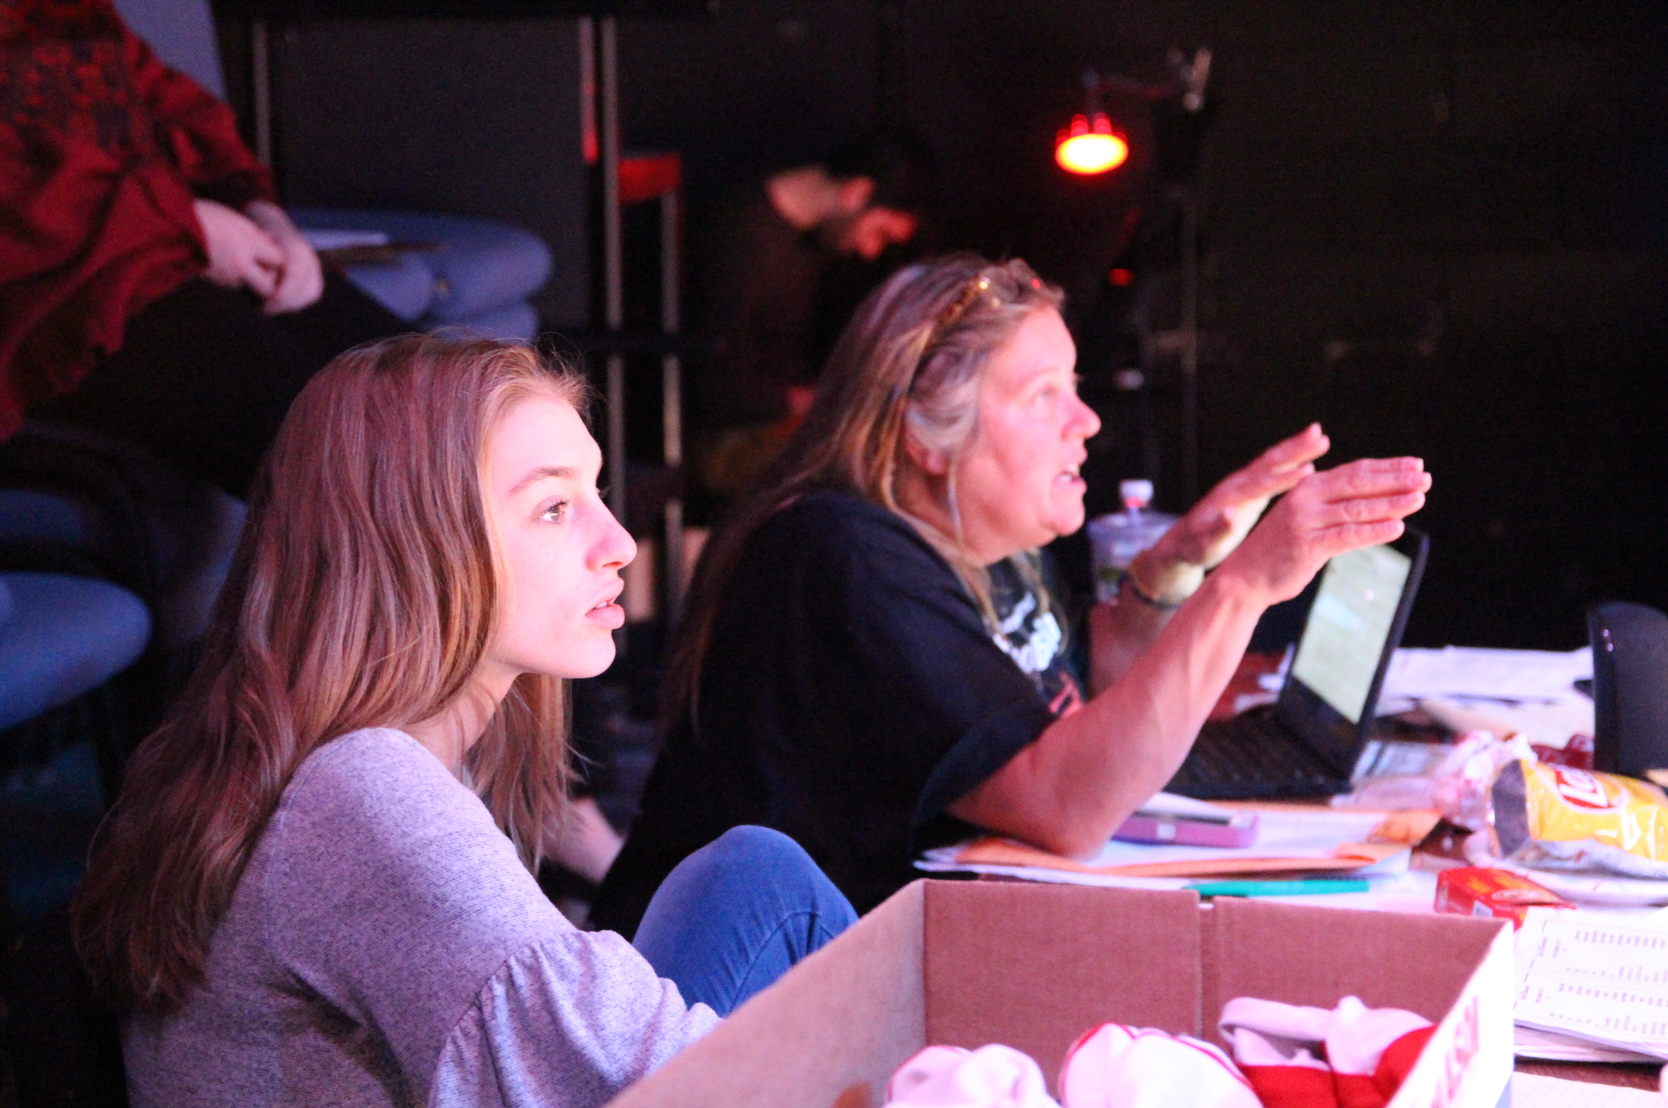 Kenleigh Merritt and Patty Cirigliano supervising the dress rehearsal of High School Musical, Dec 11, 2017 Photo: Leslie Yager